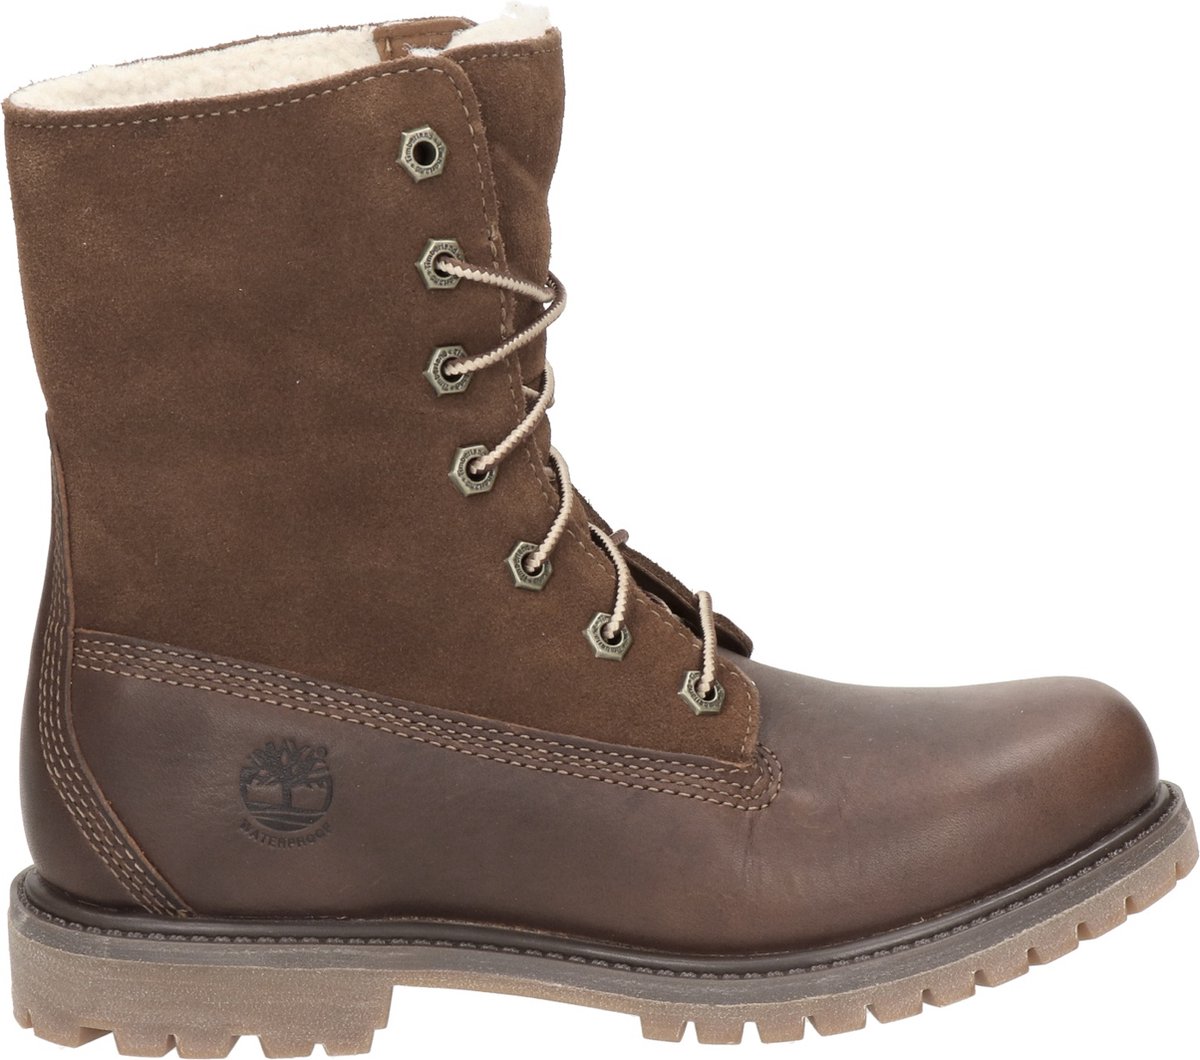 Timberland Authentic Teddy dames boot - Bruin - Maat 41 | bol.